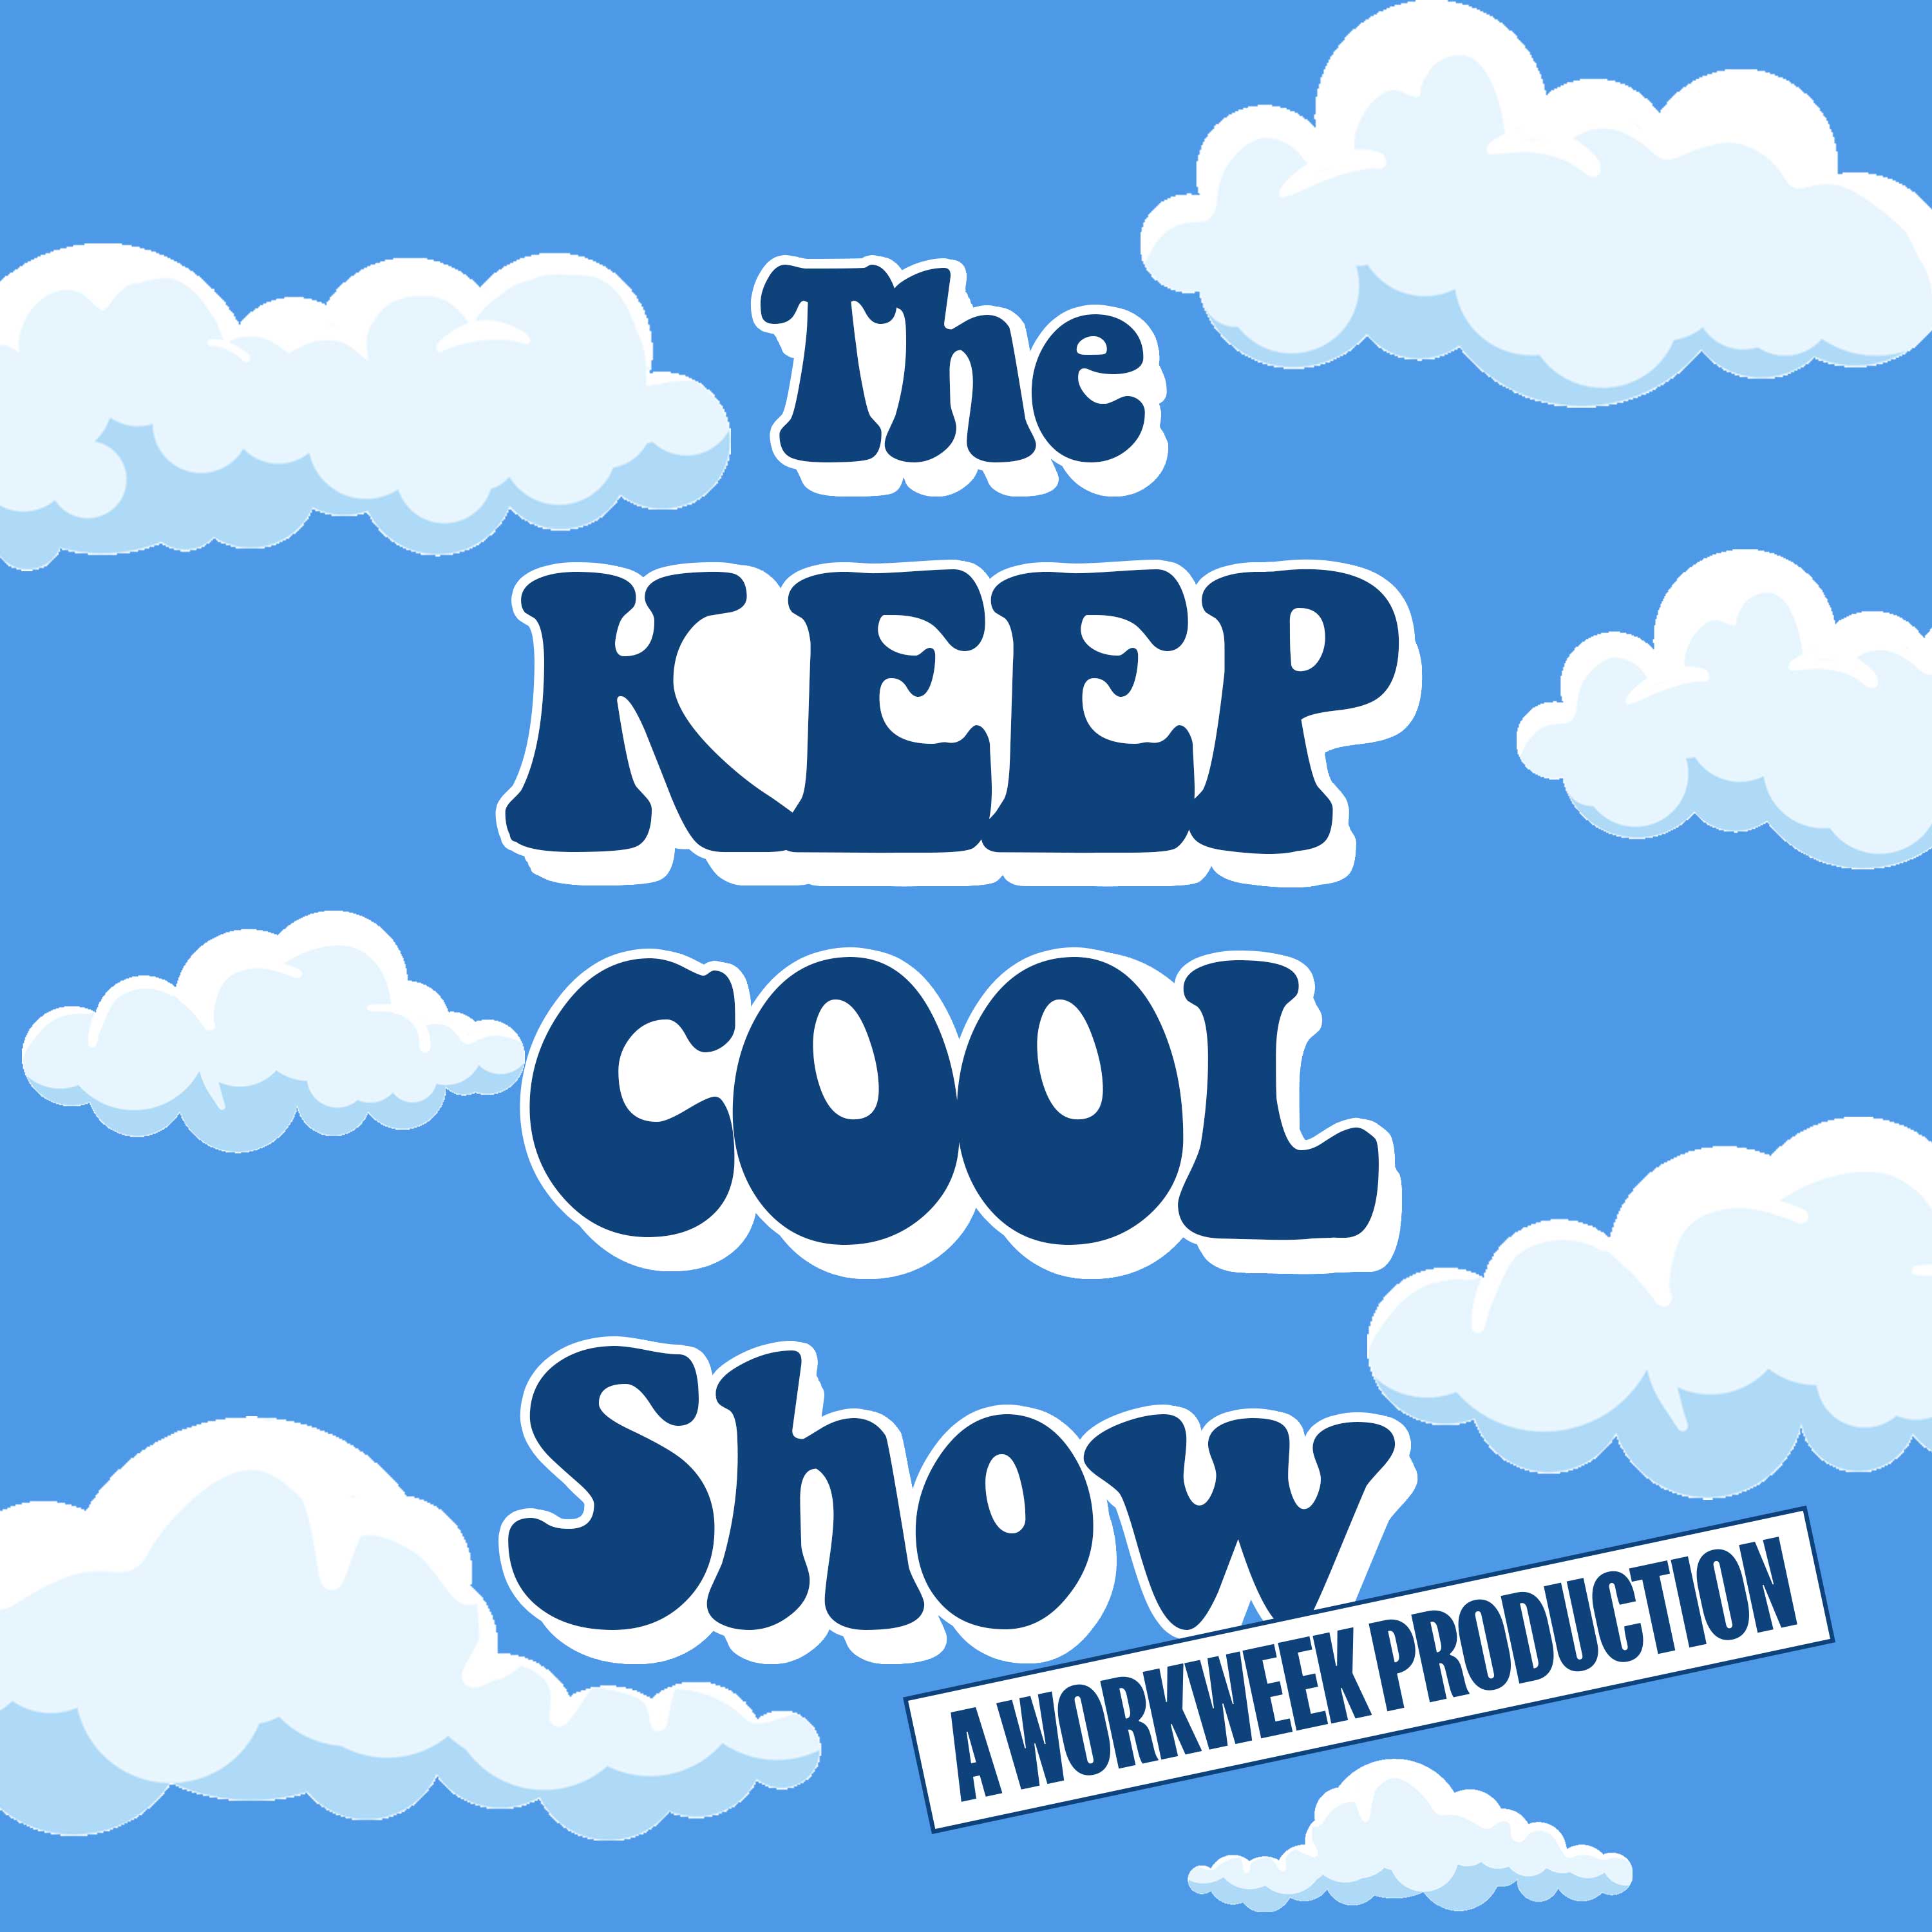 Artwork for The Keep Cool Show